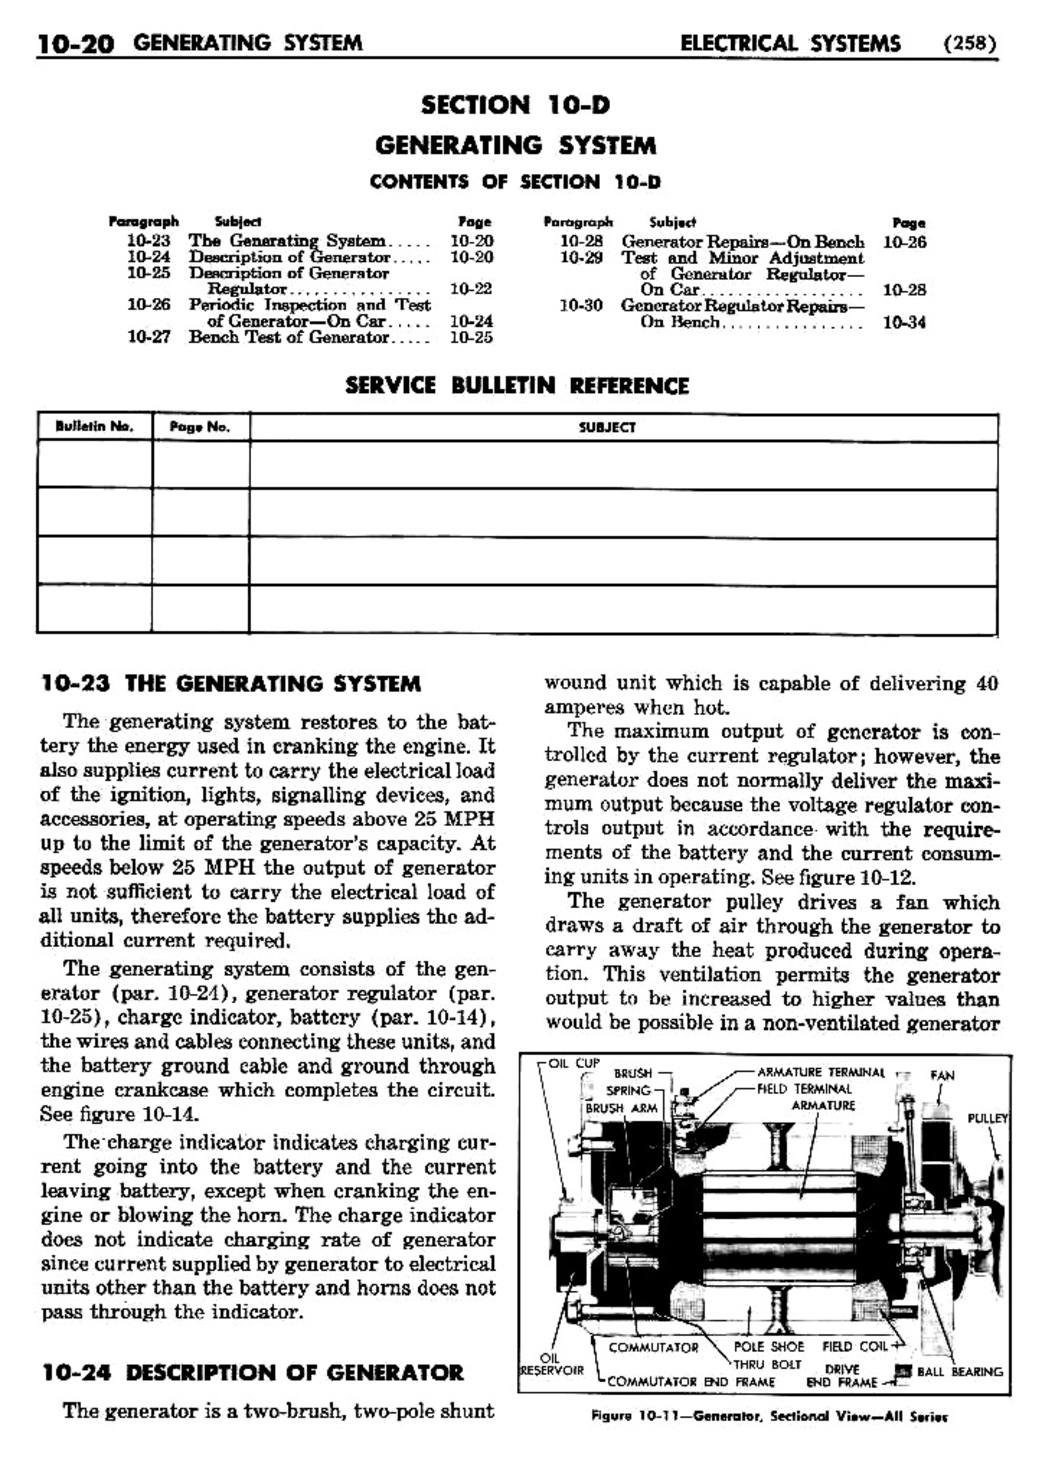 n_11 1950 Buick Shop Manual - Electrical Systems-020-020.jpg